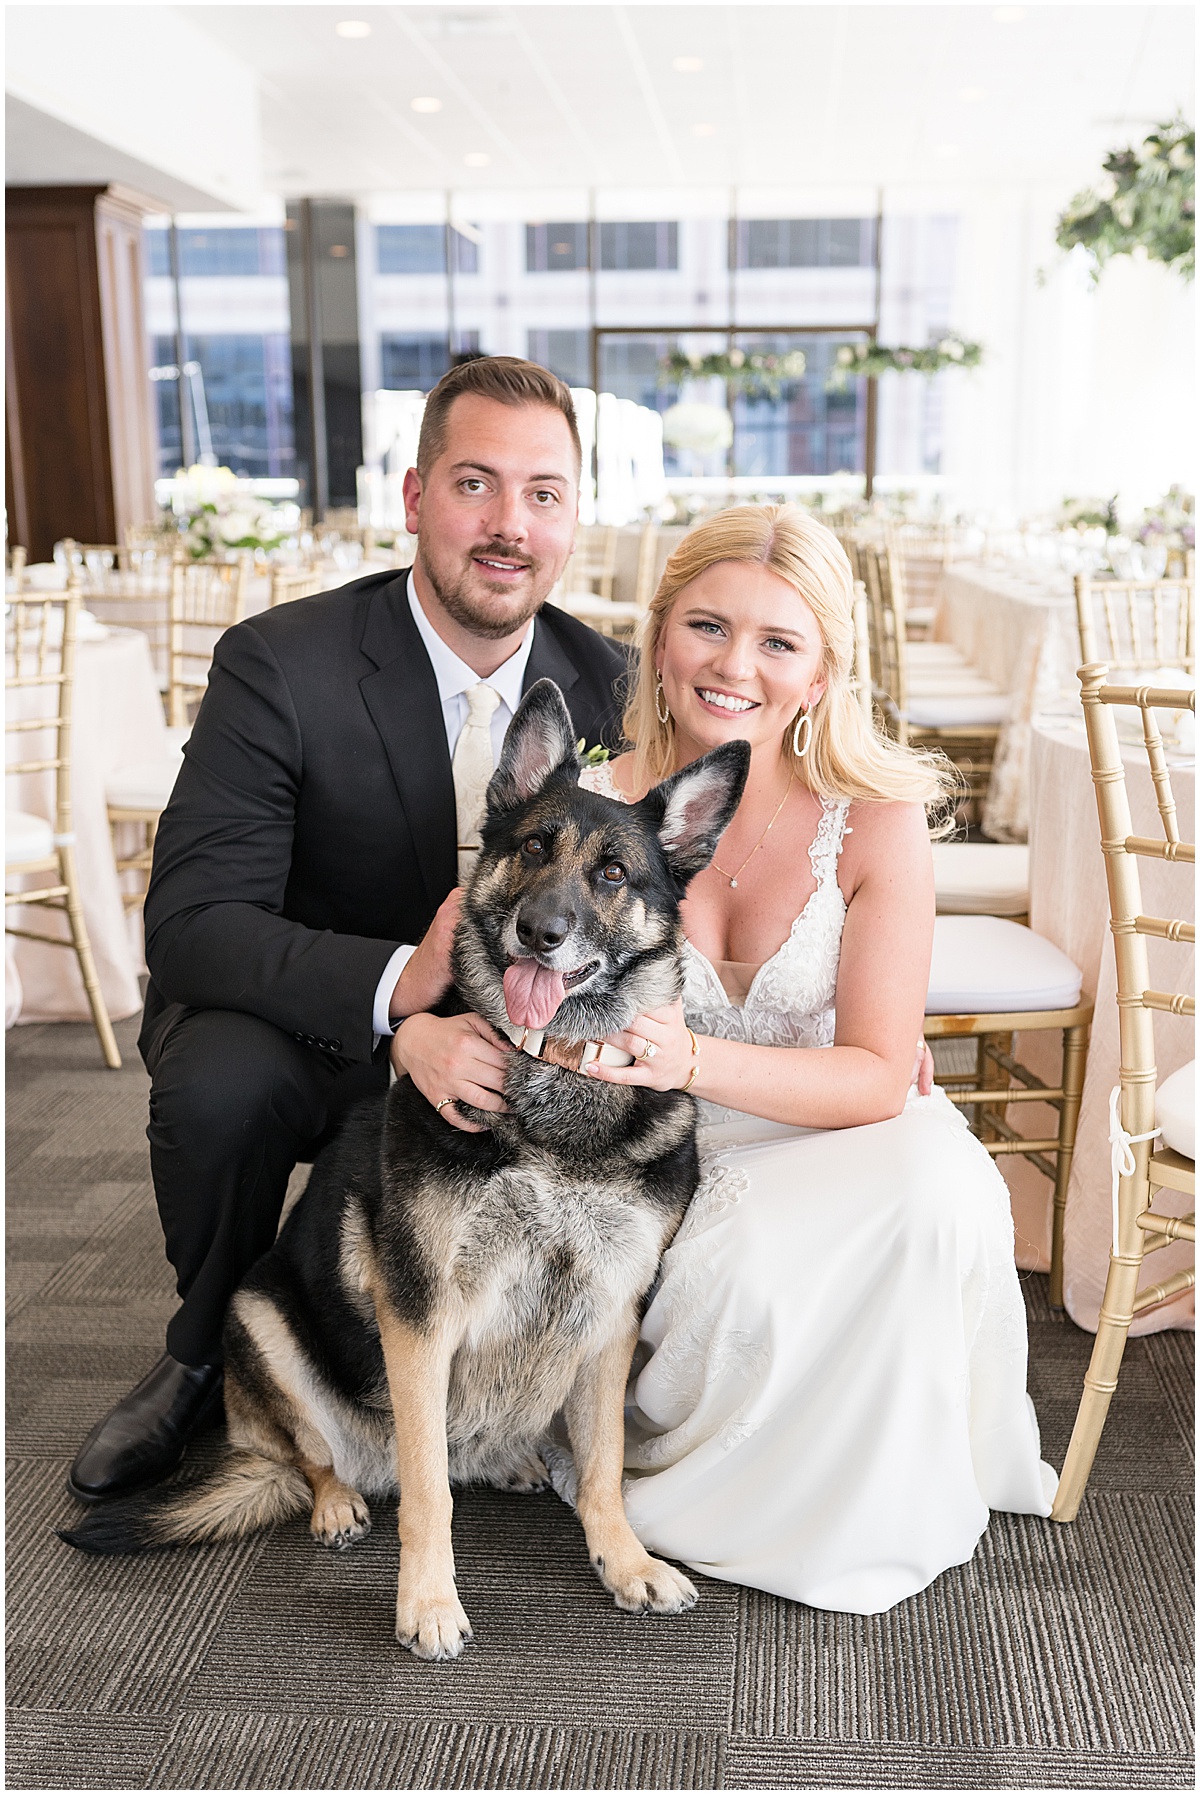 Bride and groom with dog for wedding at JPS Events in downtown Indianapolis.